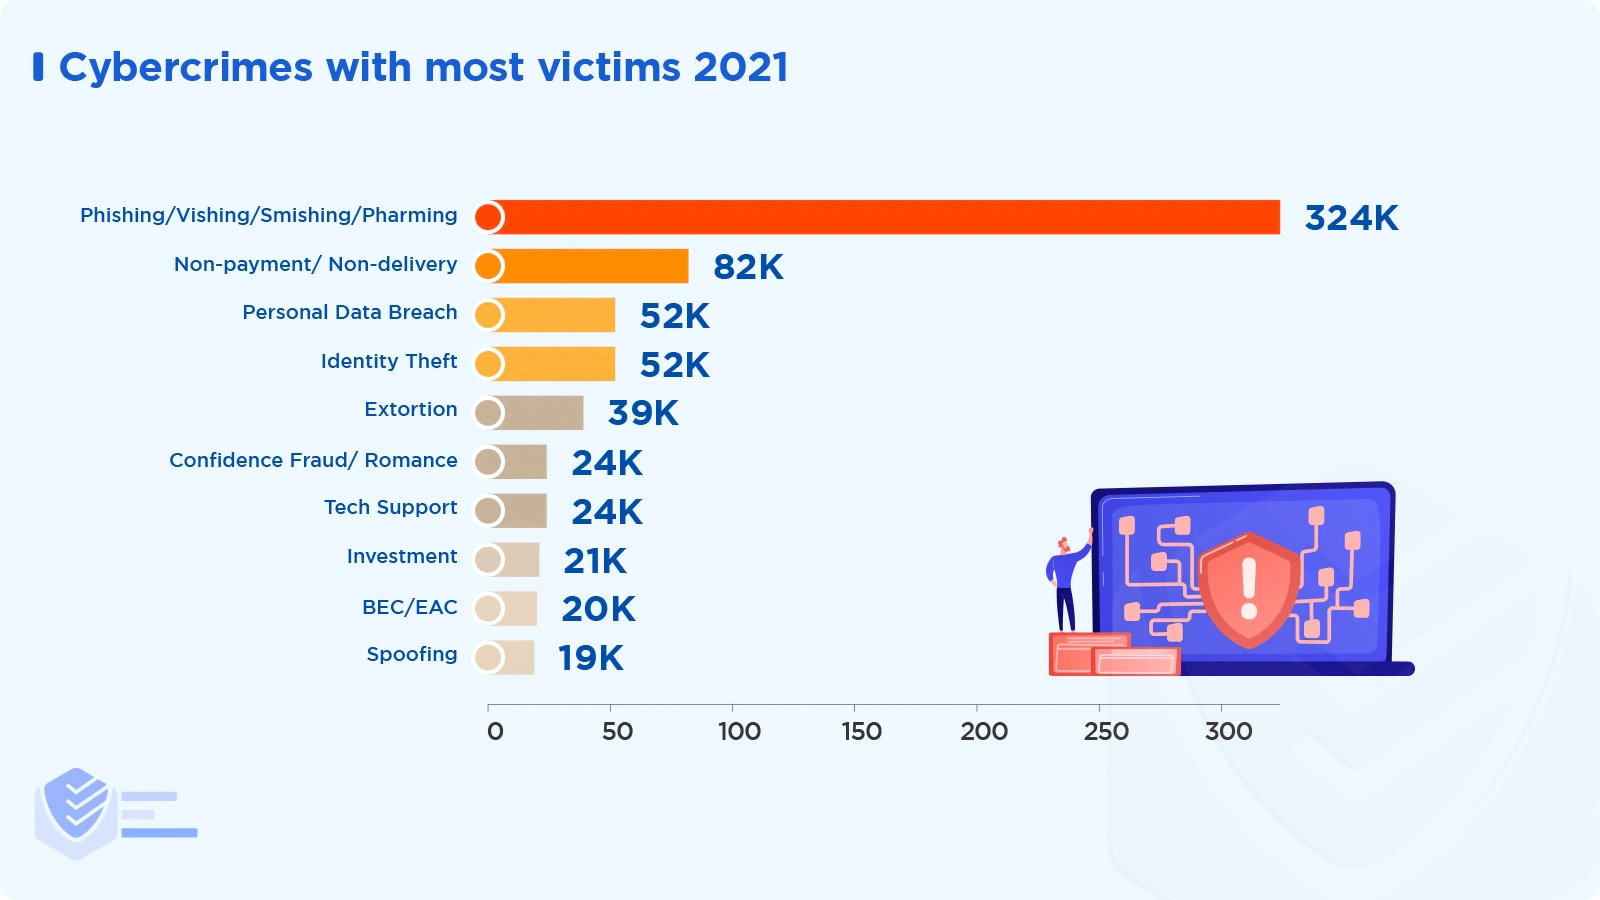 Cybercrimes with most victims 2021